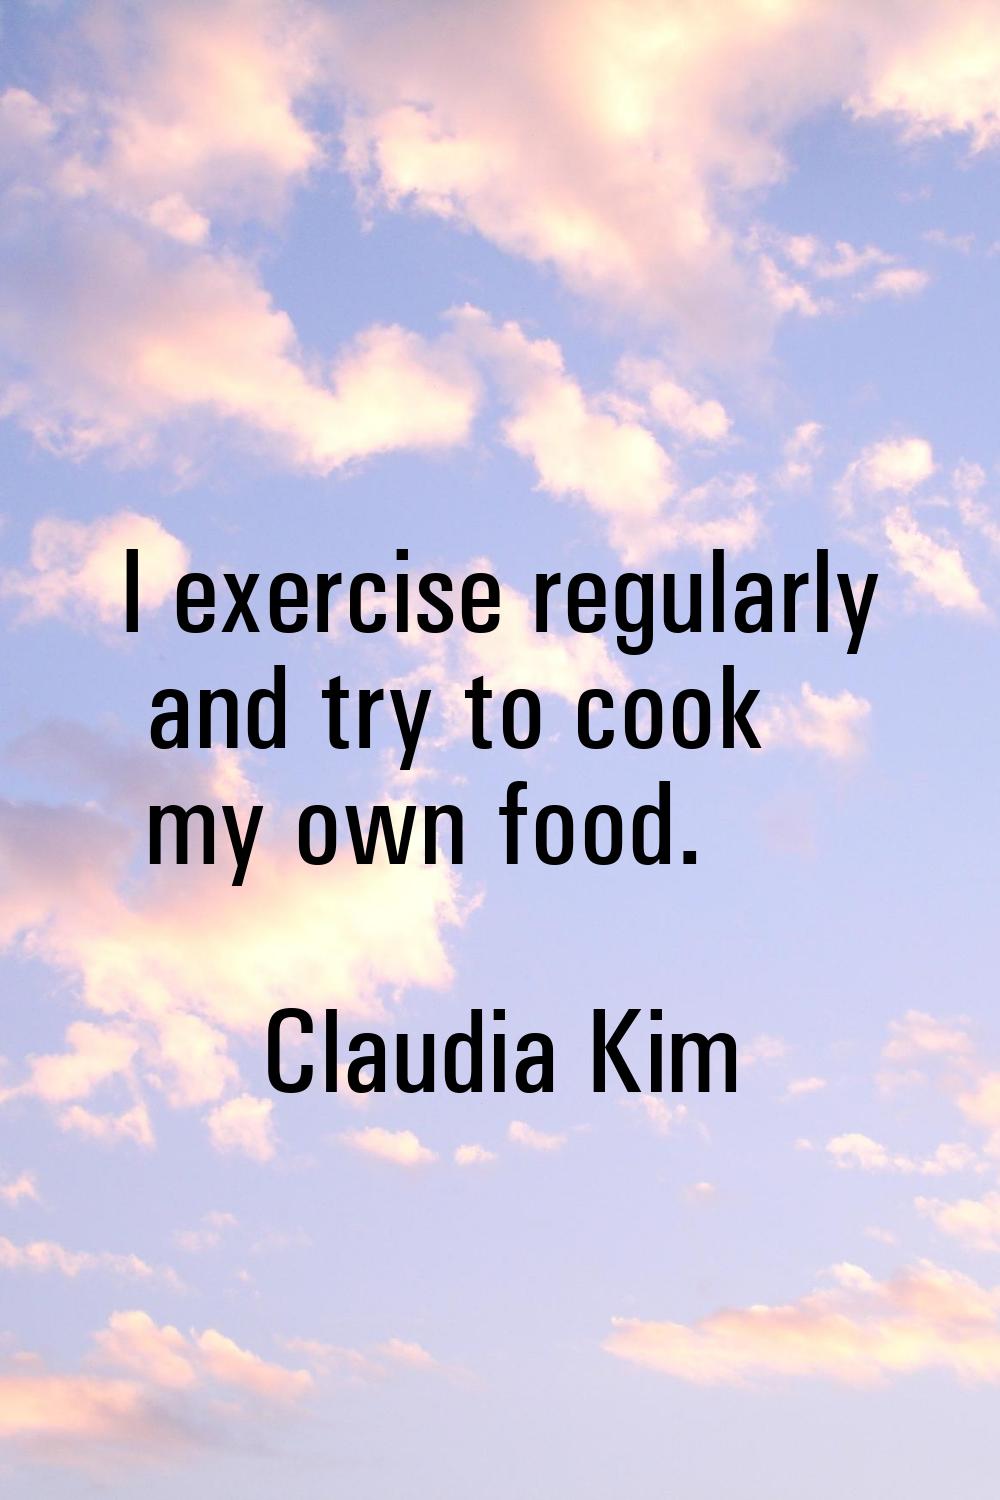 I exercise regularly and try to cook my own food.